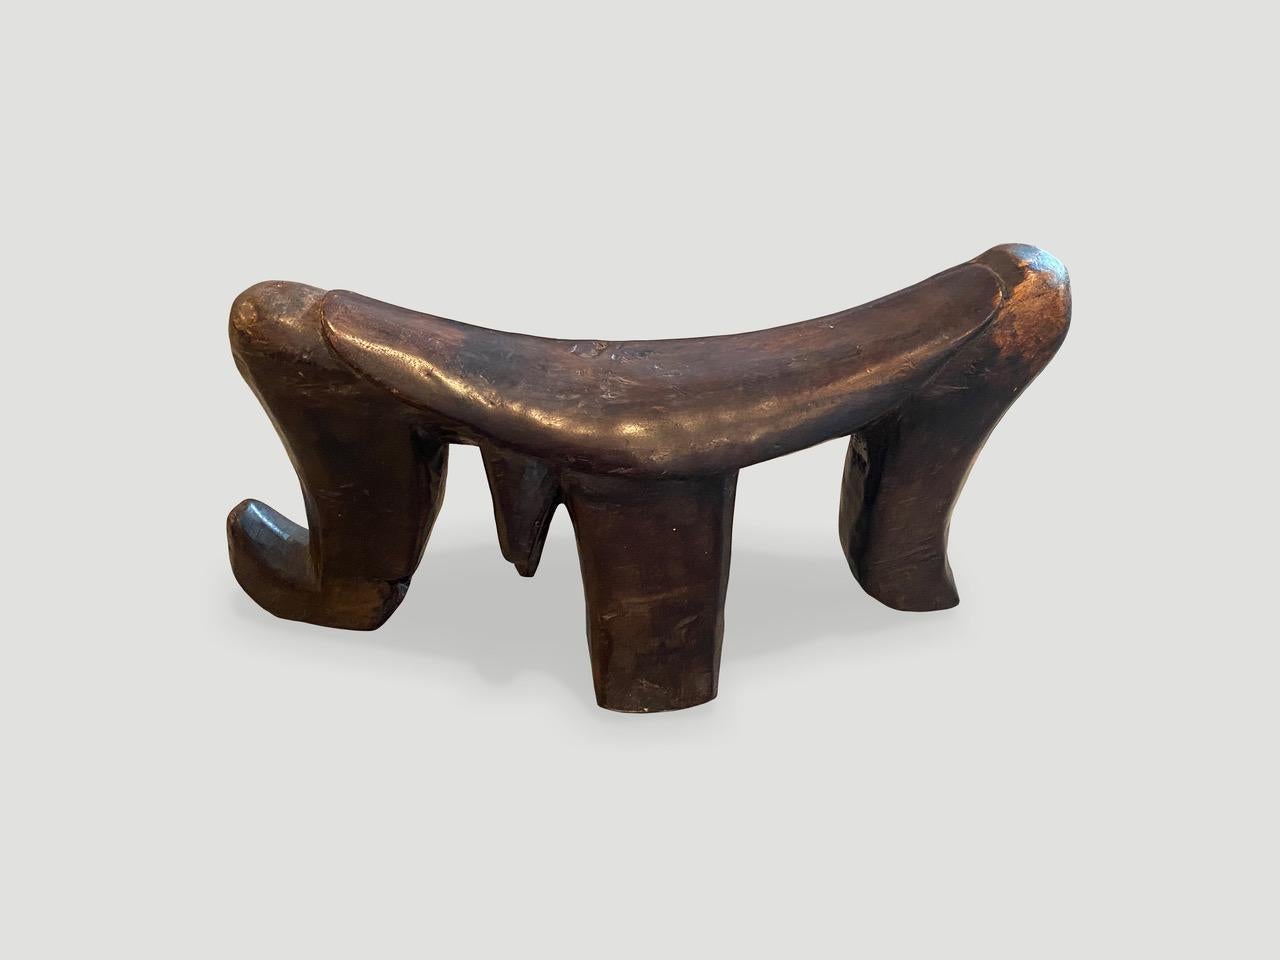 Beautiful museum quality, wooden head rest. Stunning patina on this rare piece of art from Sudan. Hand carved from a single block of wood by the Dinka tribe. Circa 1900.

This head rest was sourced in the spirit of Wabi-Sabi, a Japanese philosophy